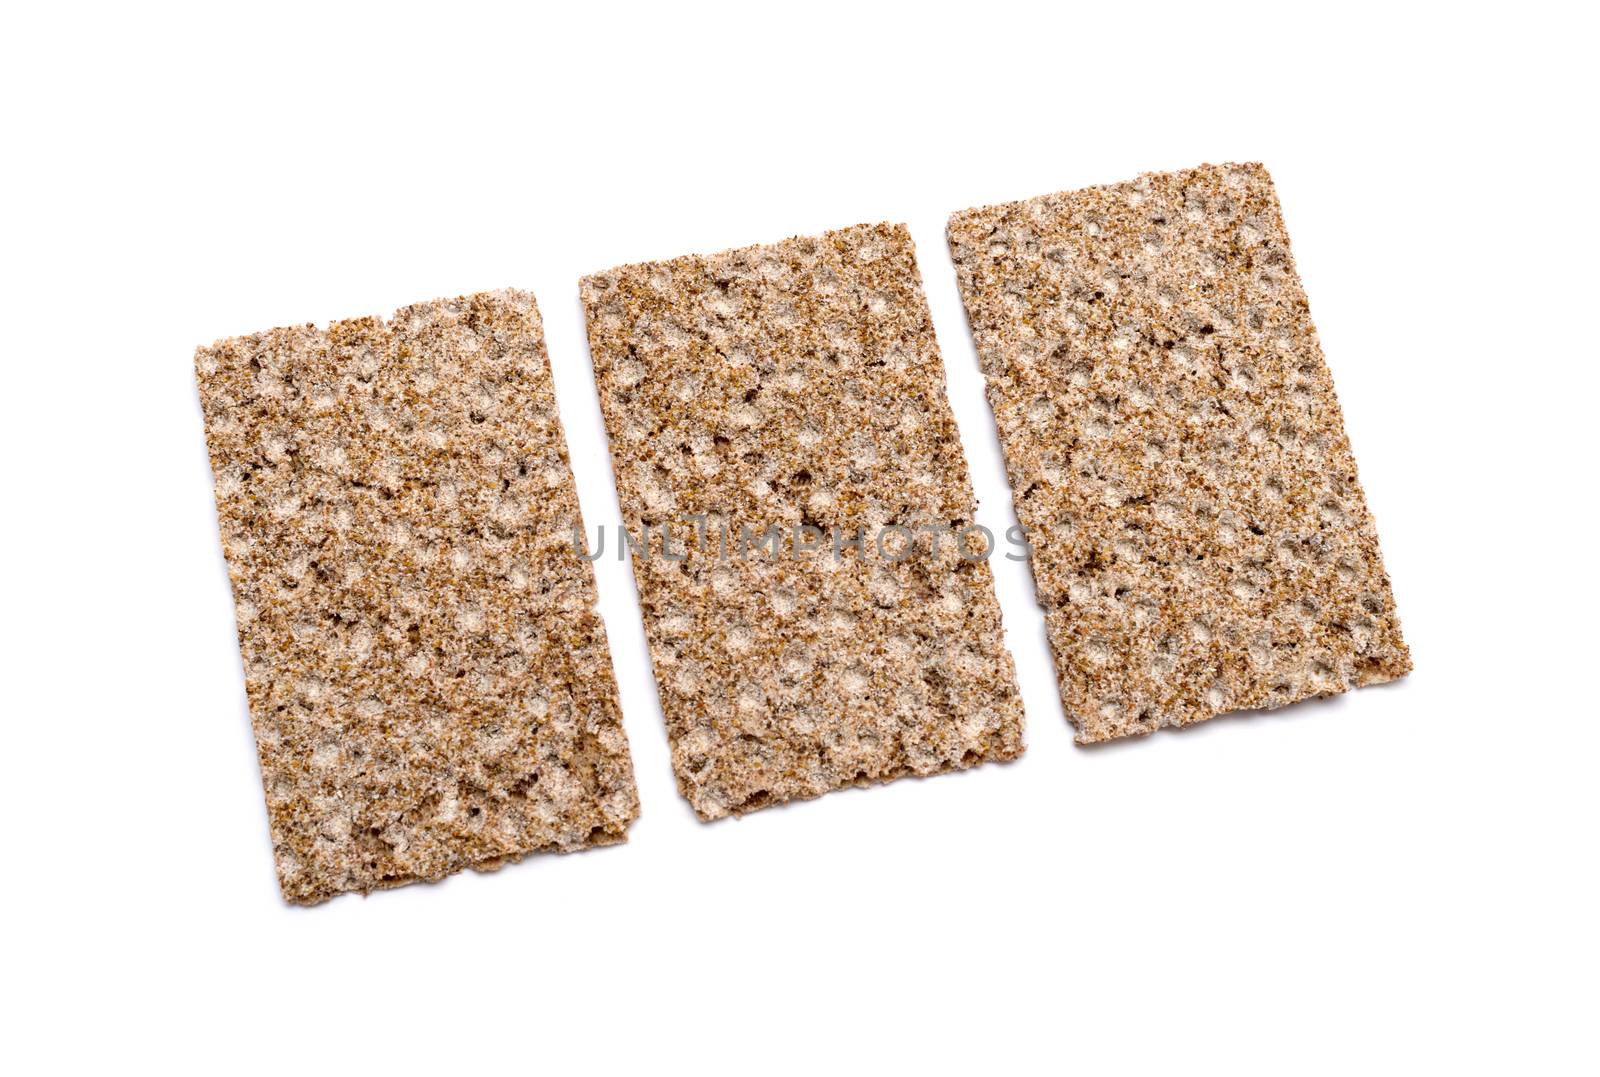 Group of crispbreads isolated on white